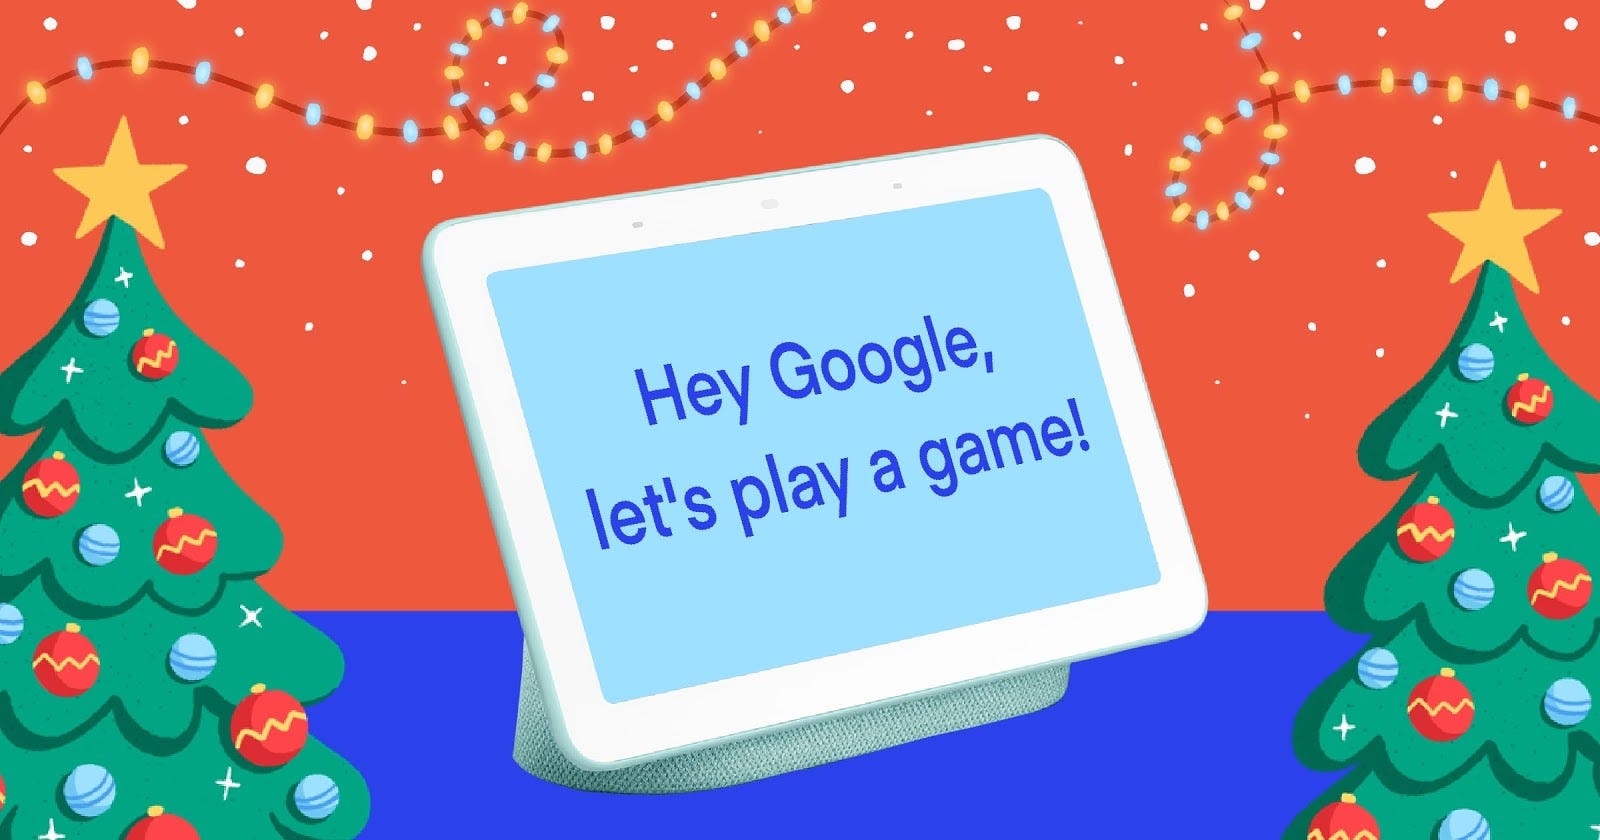 Hey Google, let's play a game 